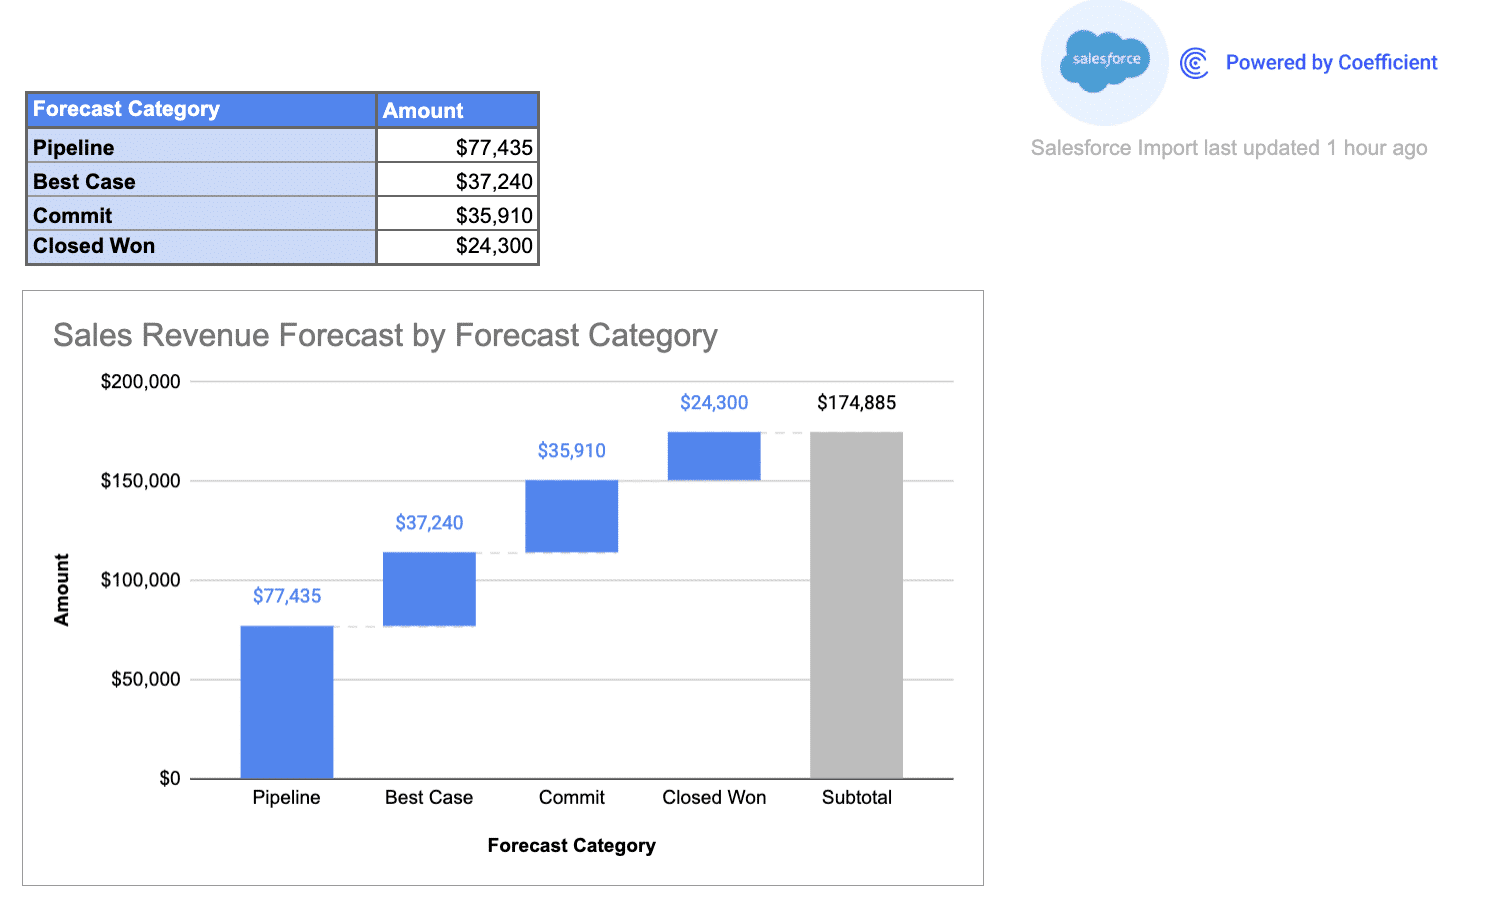 A Sales Forecasting Dashboard is a vital business tool to predict future sales performance